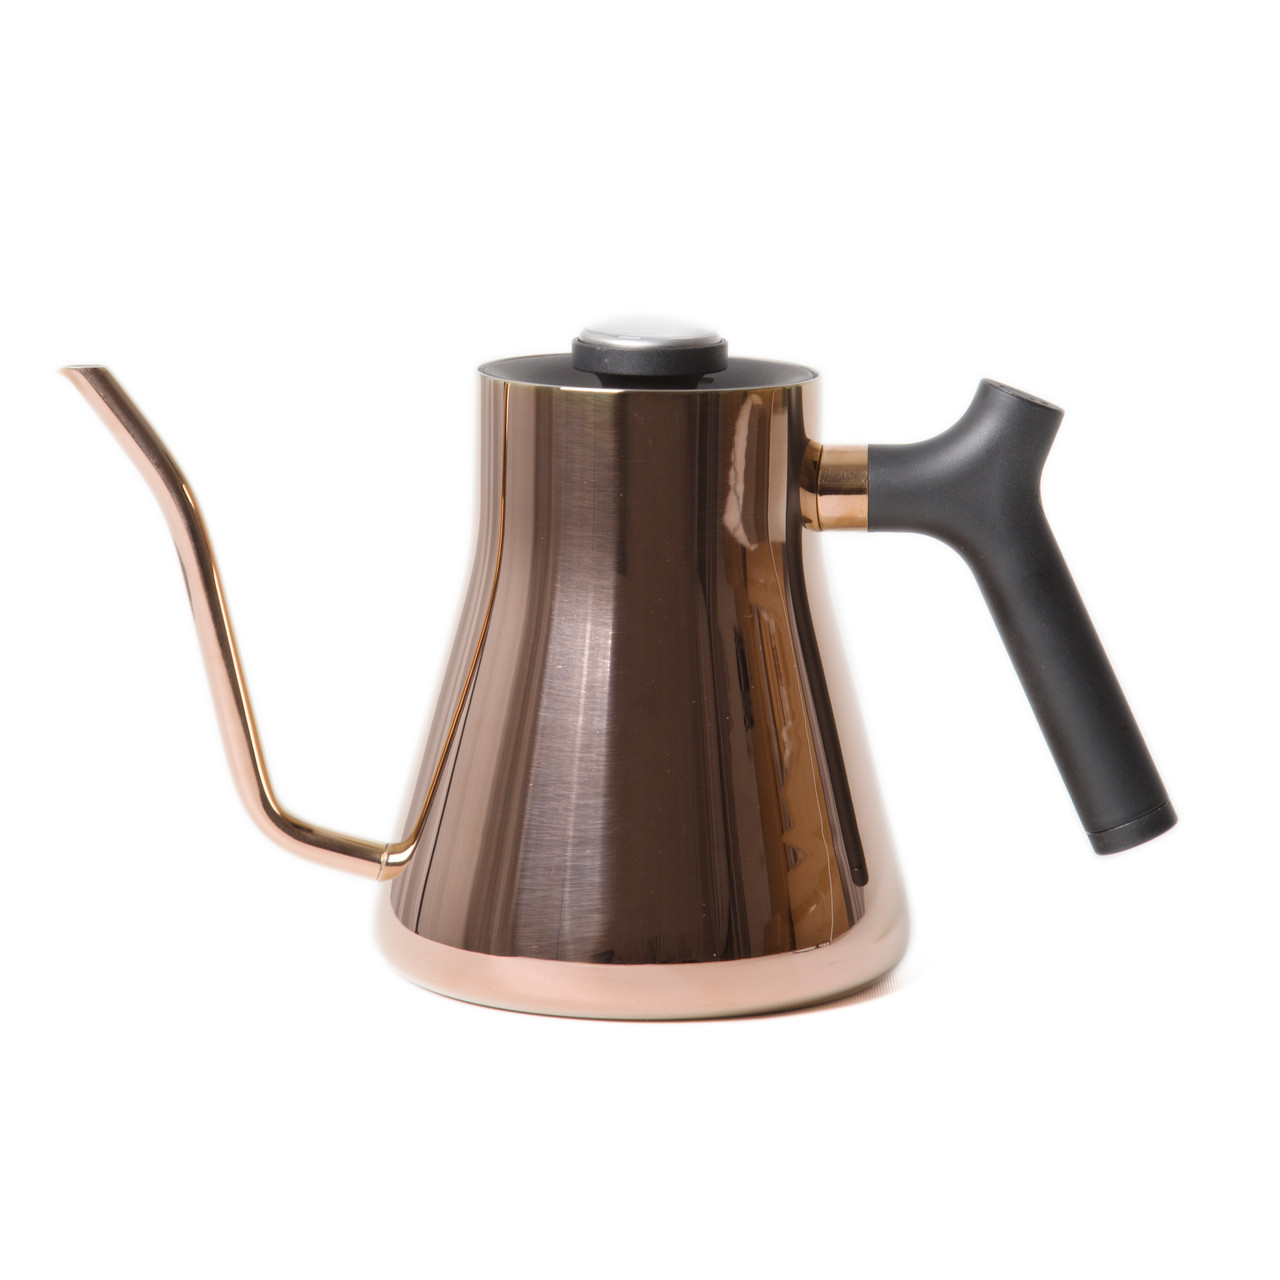 https://cdn11.bigcommerce.com/s-6h7ychjk4/images/stencil/1280x1280/products/8815/88886/fellow-stagg-copper-kettle-side__88890.1597180840.jpg?c=1&imbypass=on